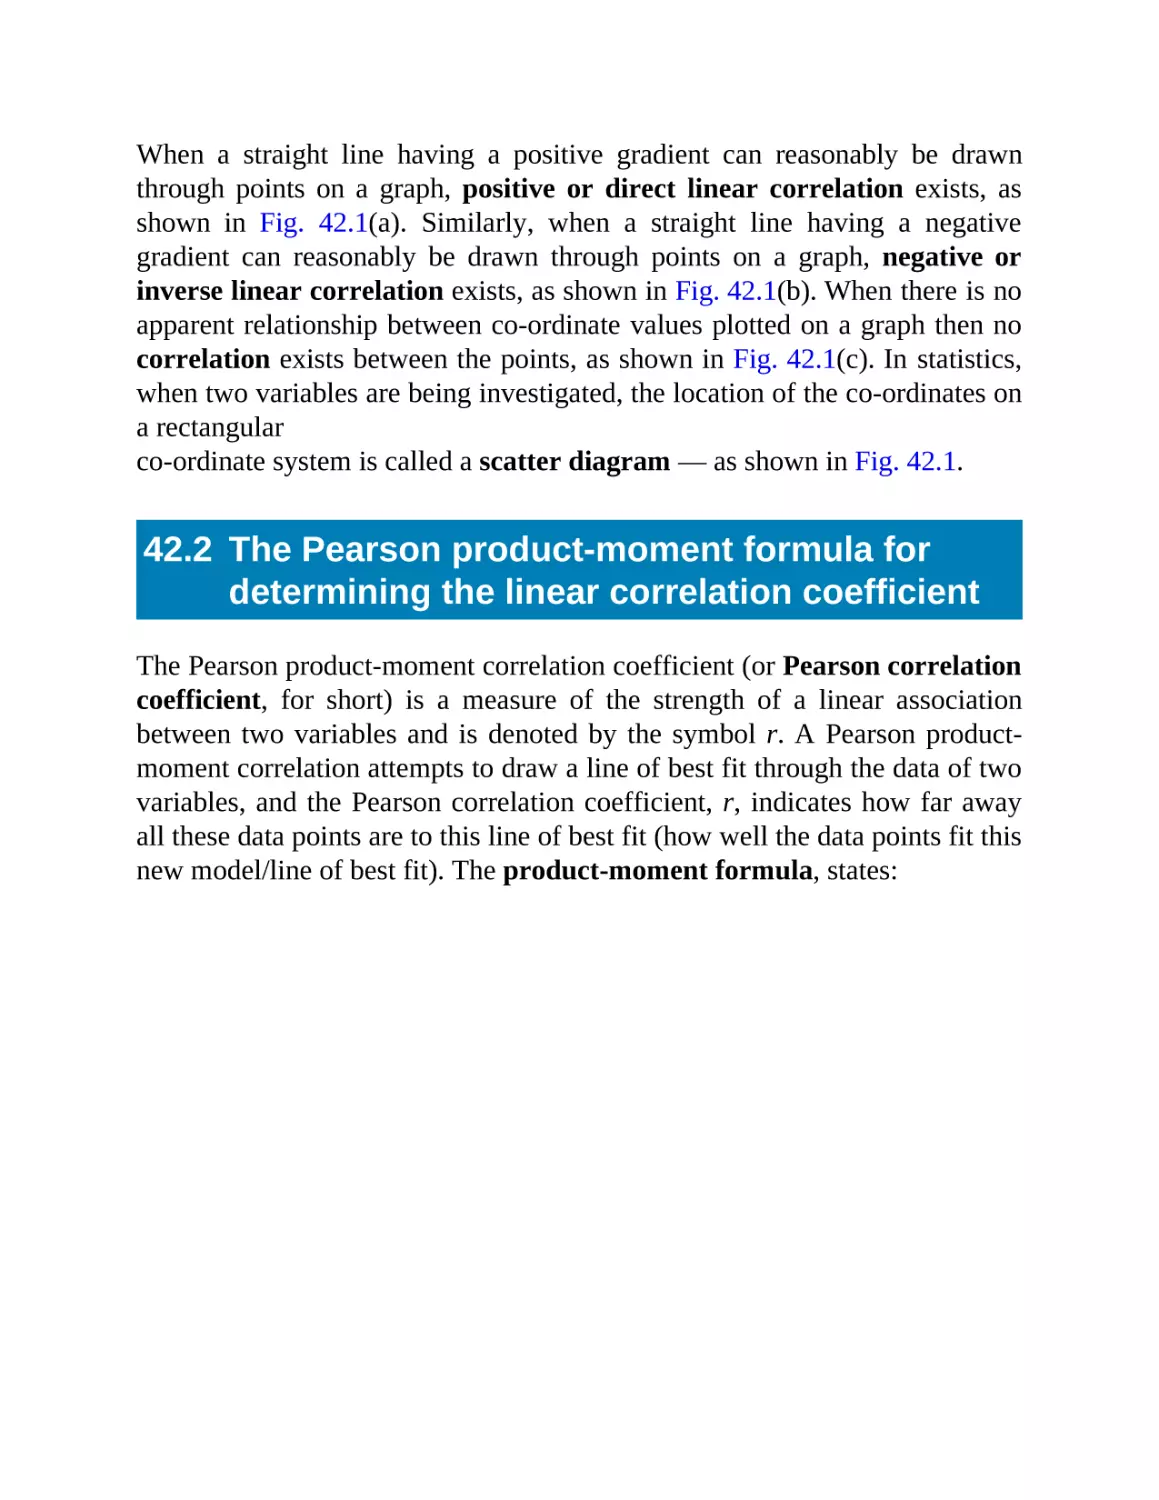 42.2 The Pearson product-moment formula for determining the linear correlation coefficient